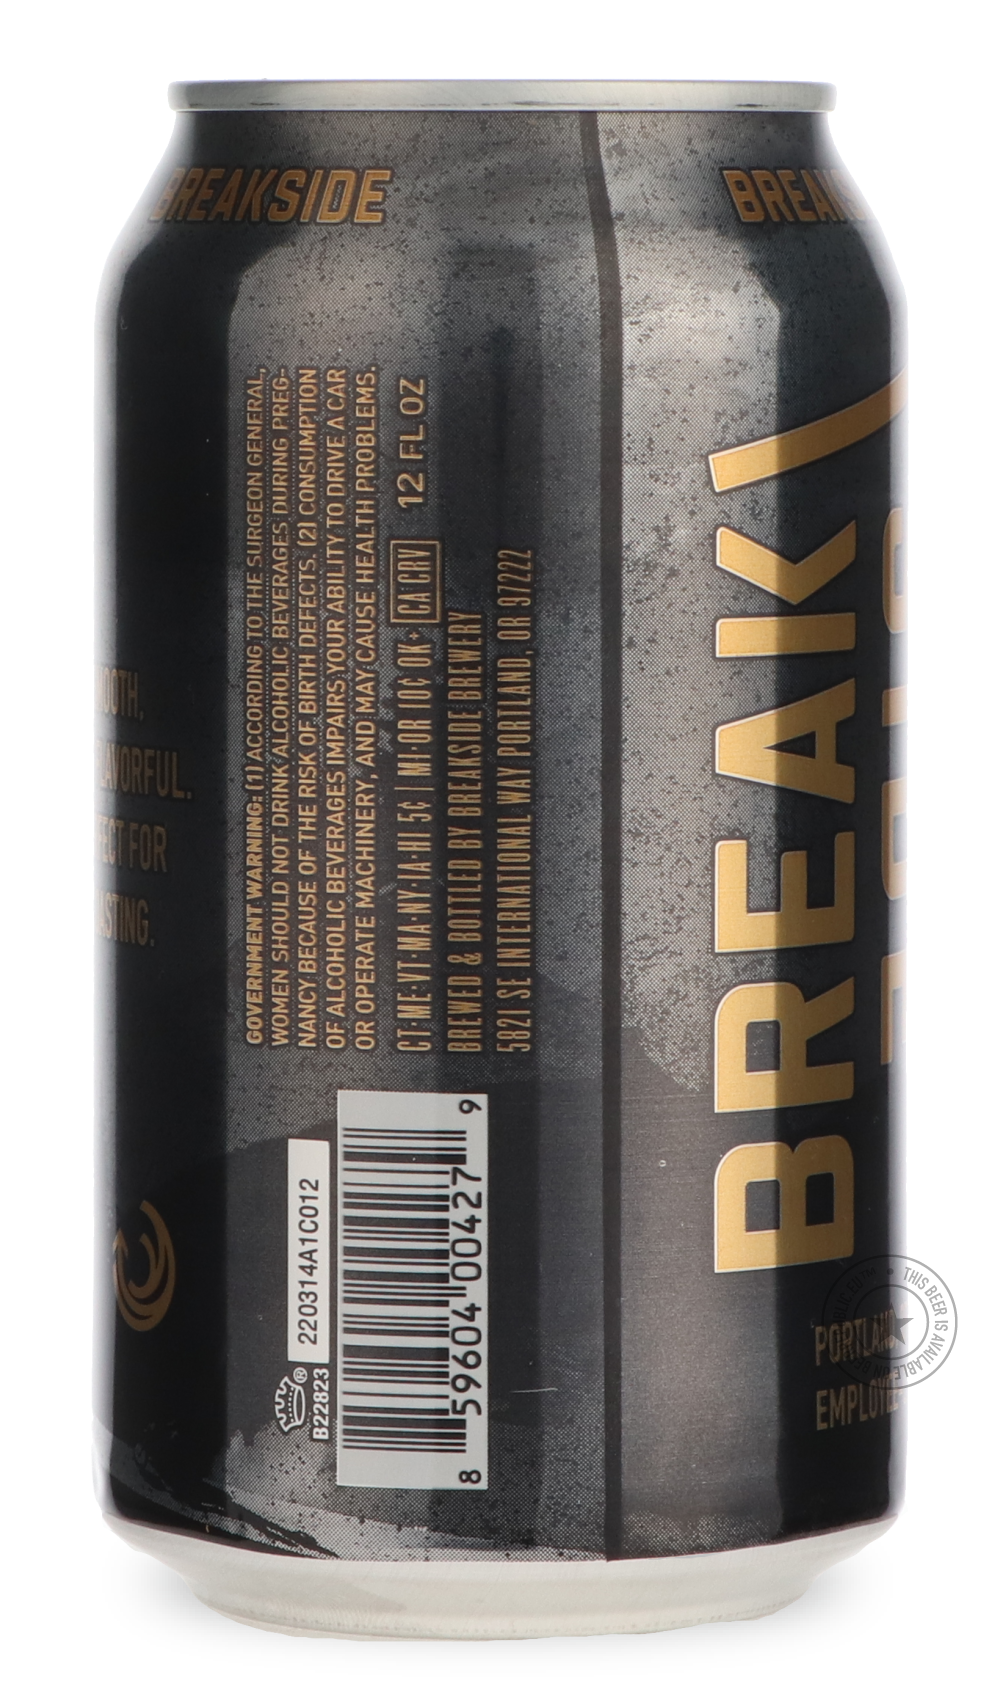 -Breakside- True Gold-Pale- Only @ Beer Republic - The best online beer store for American & Canadian craft beer - Buy beer online from the USA and Canada - Bier online kopen - Amerikaans bier kopen - Craft beer store - Craft beer kopen - Amerikanisch bier kaufen - Bier online kaufen - Acheter biere online - IPA - Stout - Porter - New England IPA - Hazy IPA - Imperial Stout - Barrel Aged - Barrel Aged Imperial Stout - Brown - Dark beer - Blond - Blonde - Pilsner - Lager - Wheat - Weizen - Amber - Barley Win